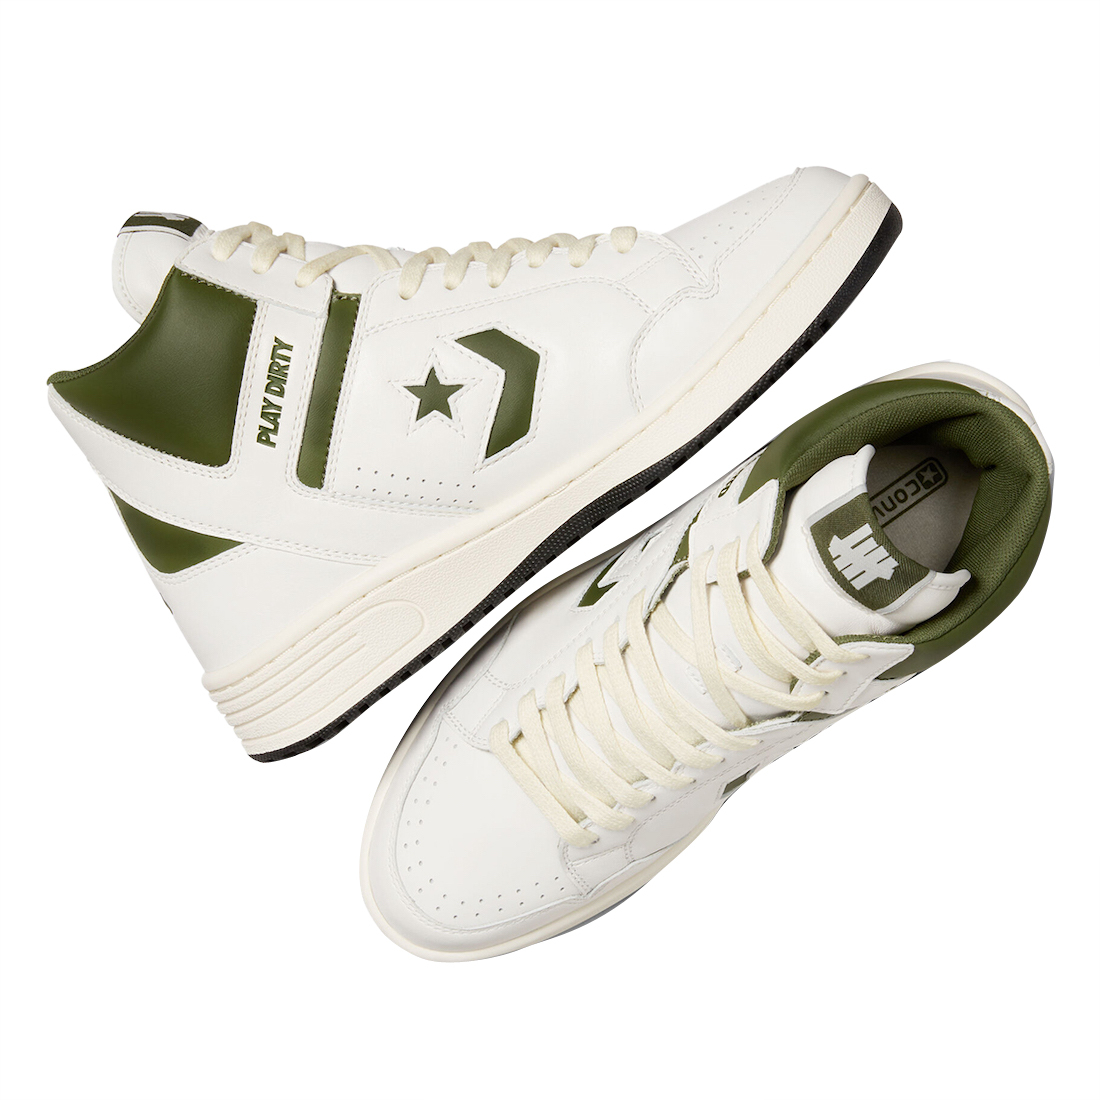 Undefeated x Converse Weapon Egret A08657C